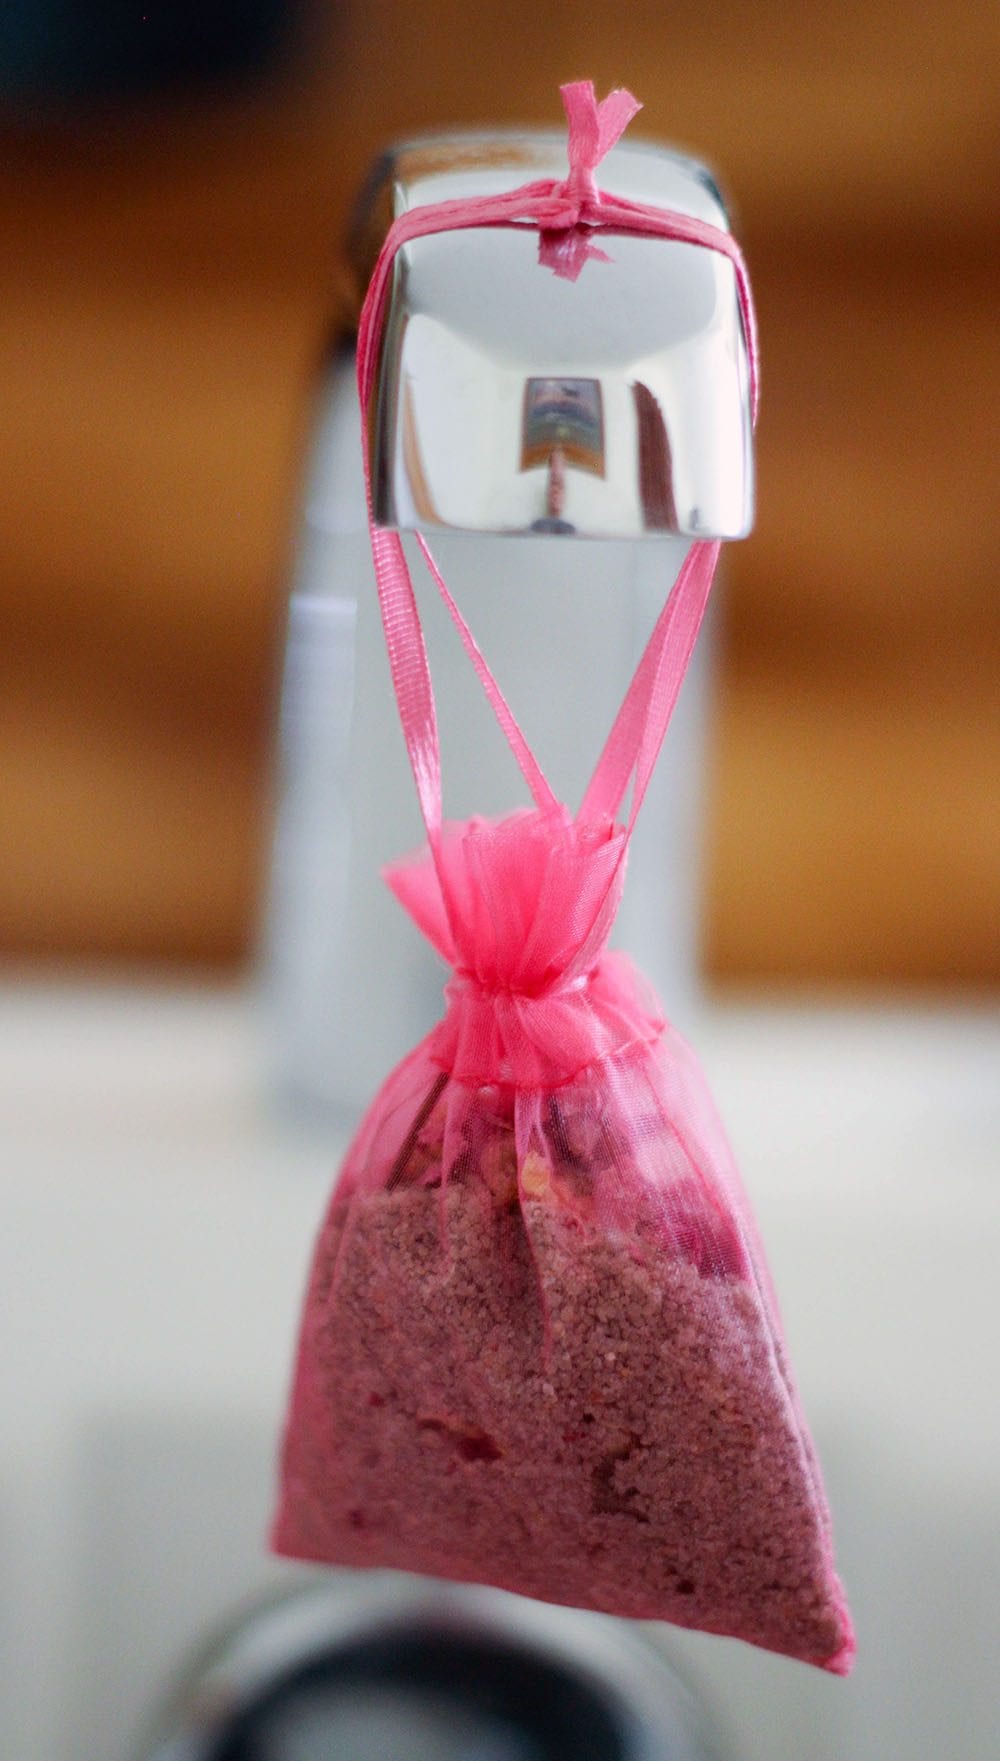 Bath salt in a bag hanging from the faucet